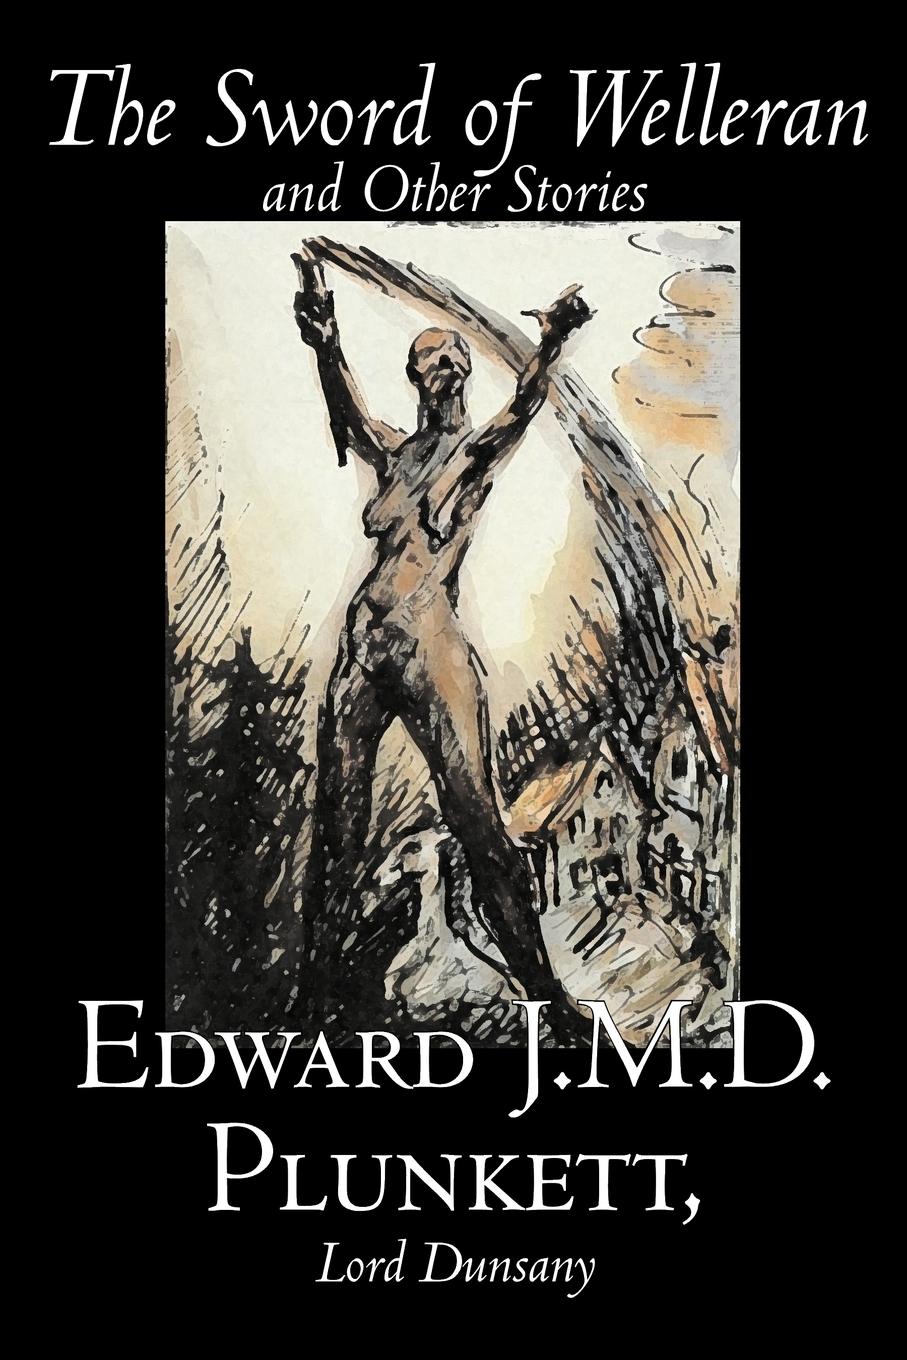 The Sword of Welleran and Other Stories by Edward J. M. D. Plunkett, Fiction, Classics, Fantasy, Horror - Plunkett, Edward J. M. D. Lord Dunsany